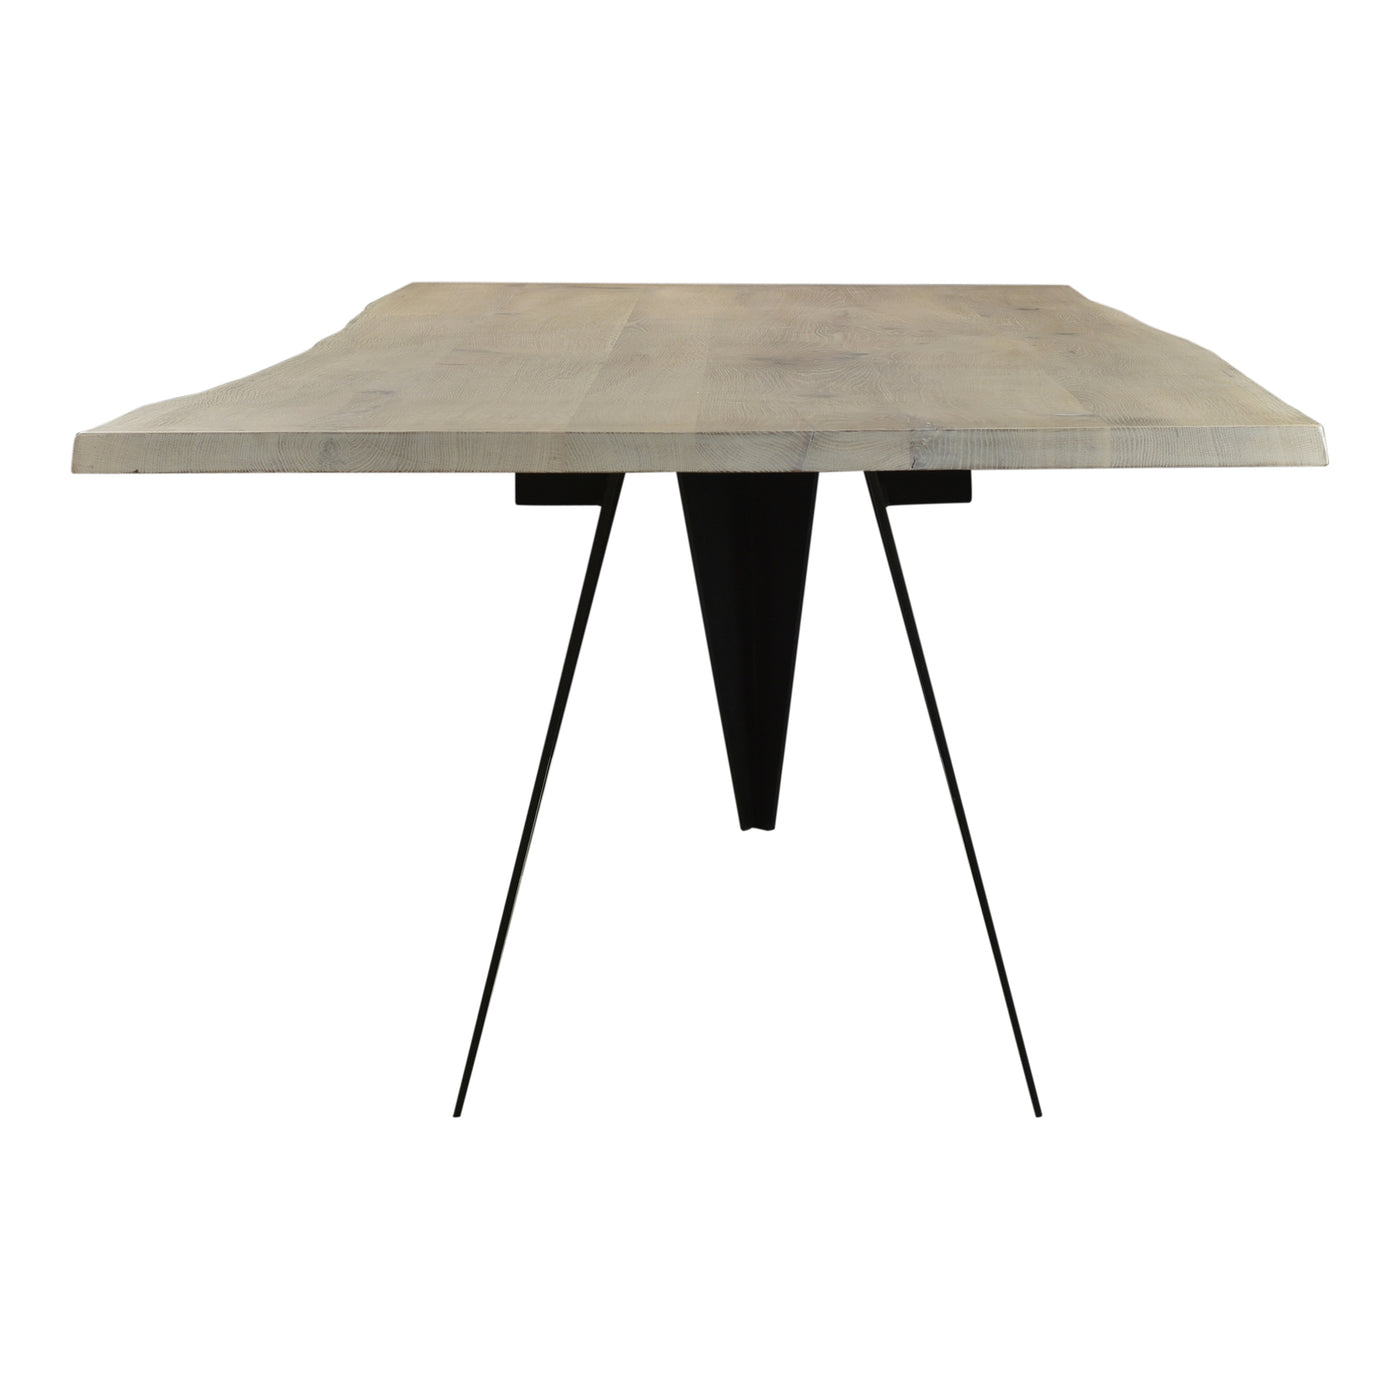 Elevate your living space to new heights with the Bird collection. This dining table’s solid oak surface features a live e...